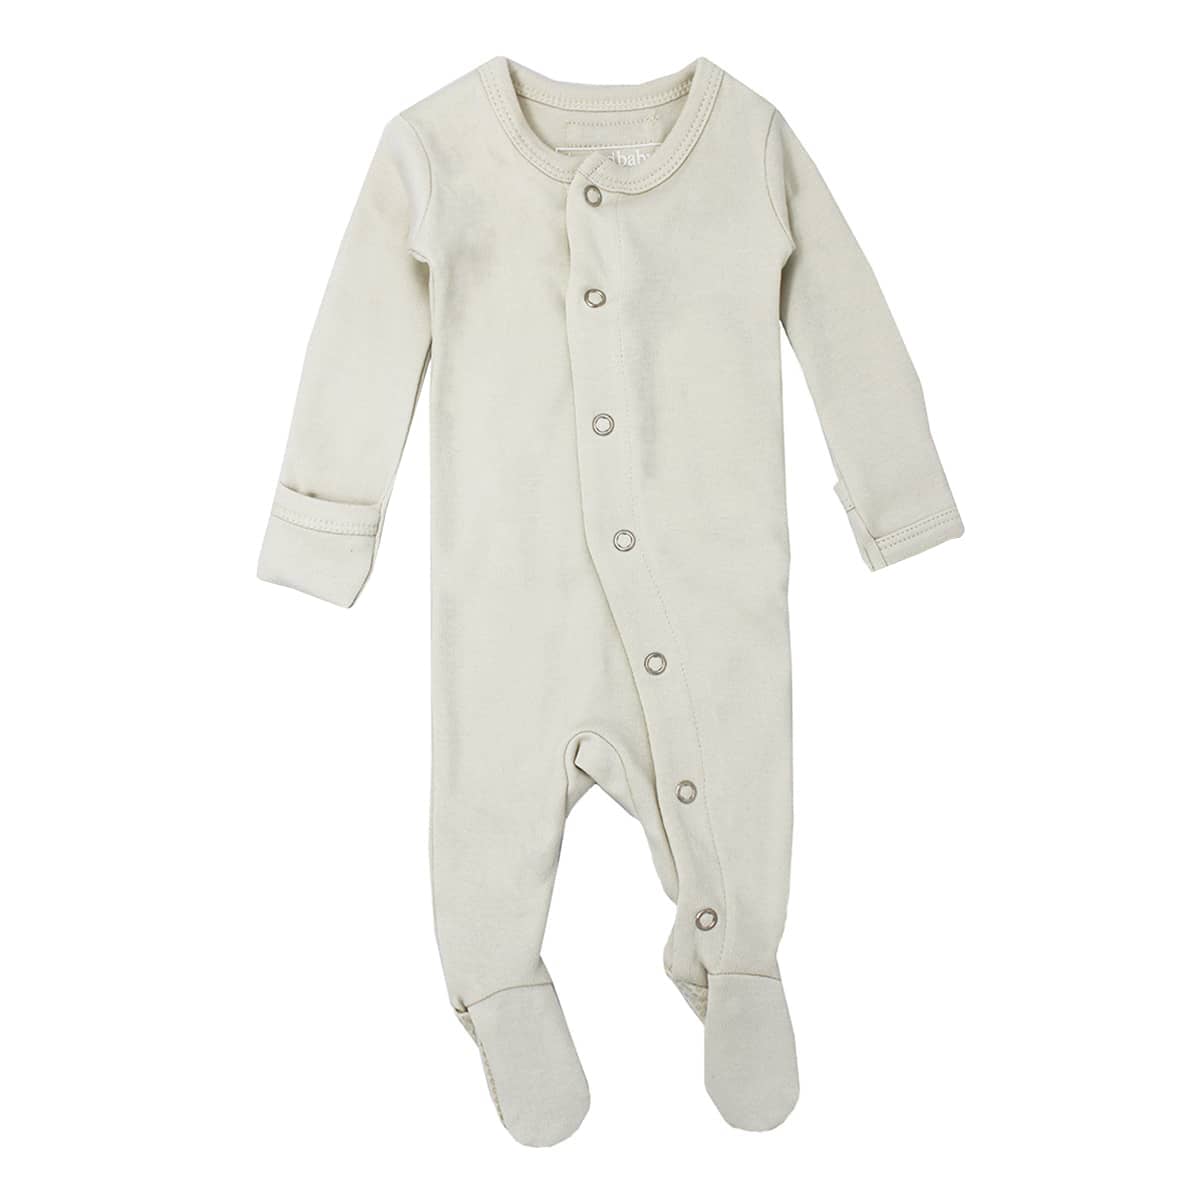 L'ovedbaby Organic Gl'oved Footed Overall - Stone